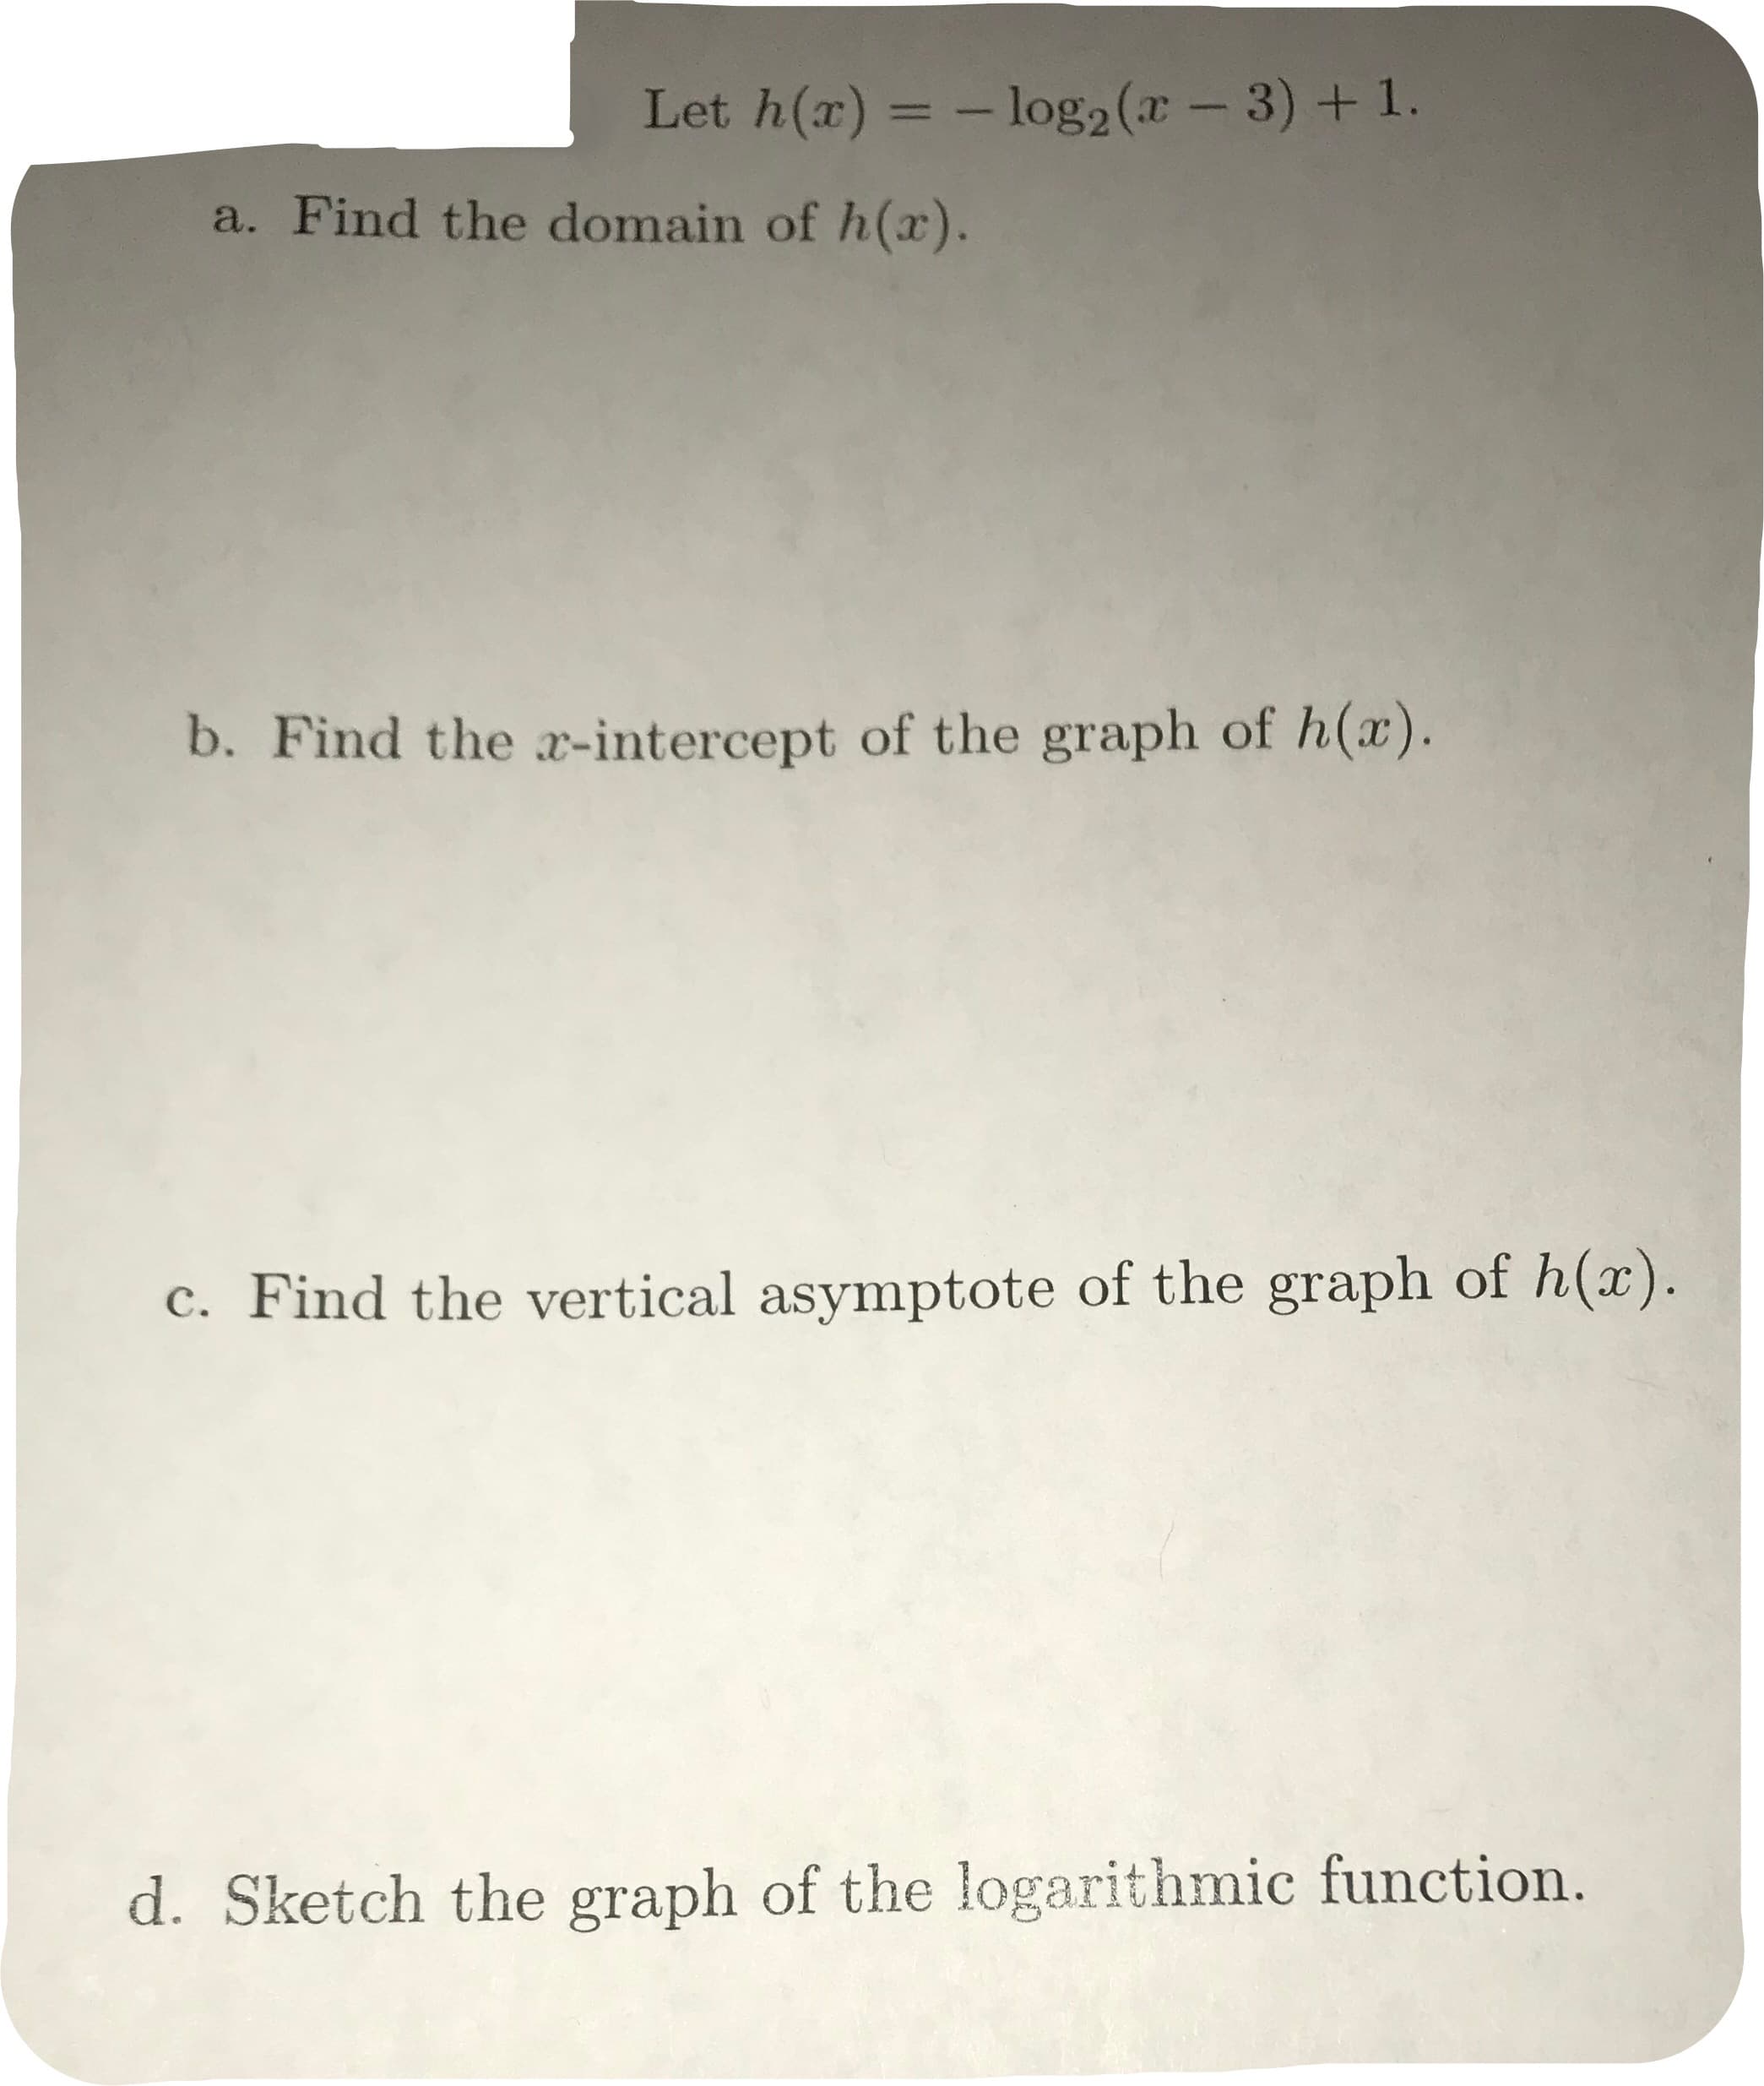 Let h(x)
- log2(-3) +1.
a. Find the domain of h(x).
b. Find the z-intercept of the graph of h(x).
c. Find the vertical asymptote of the graph of h(z)
d. Sketch the graph of the logarithmic function
